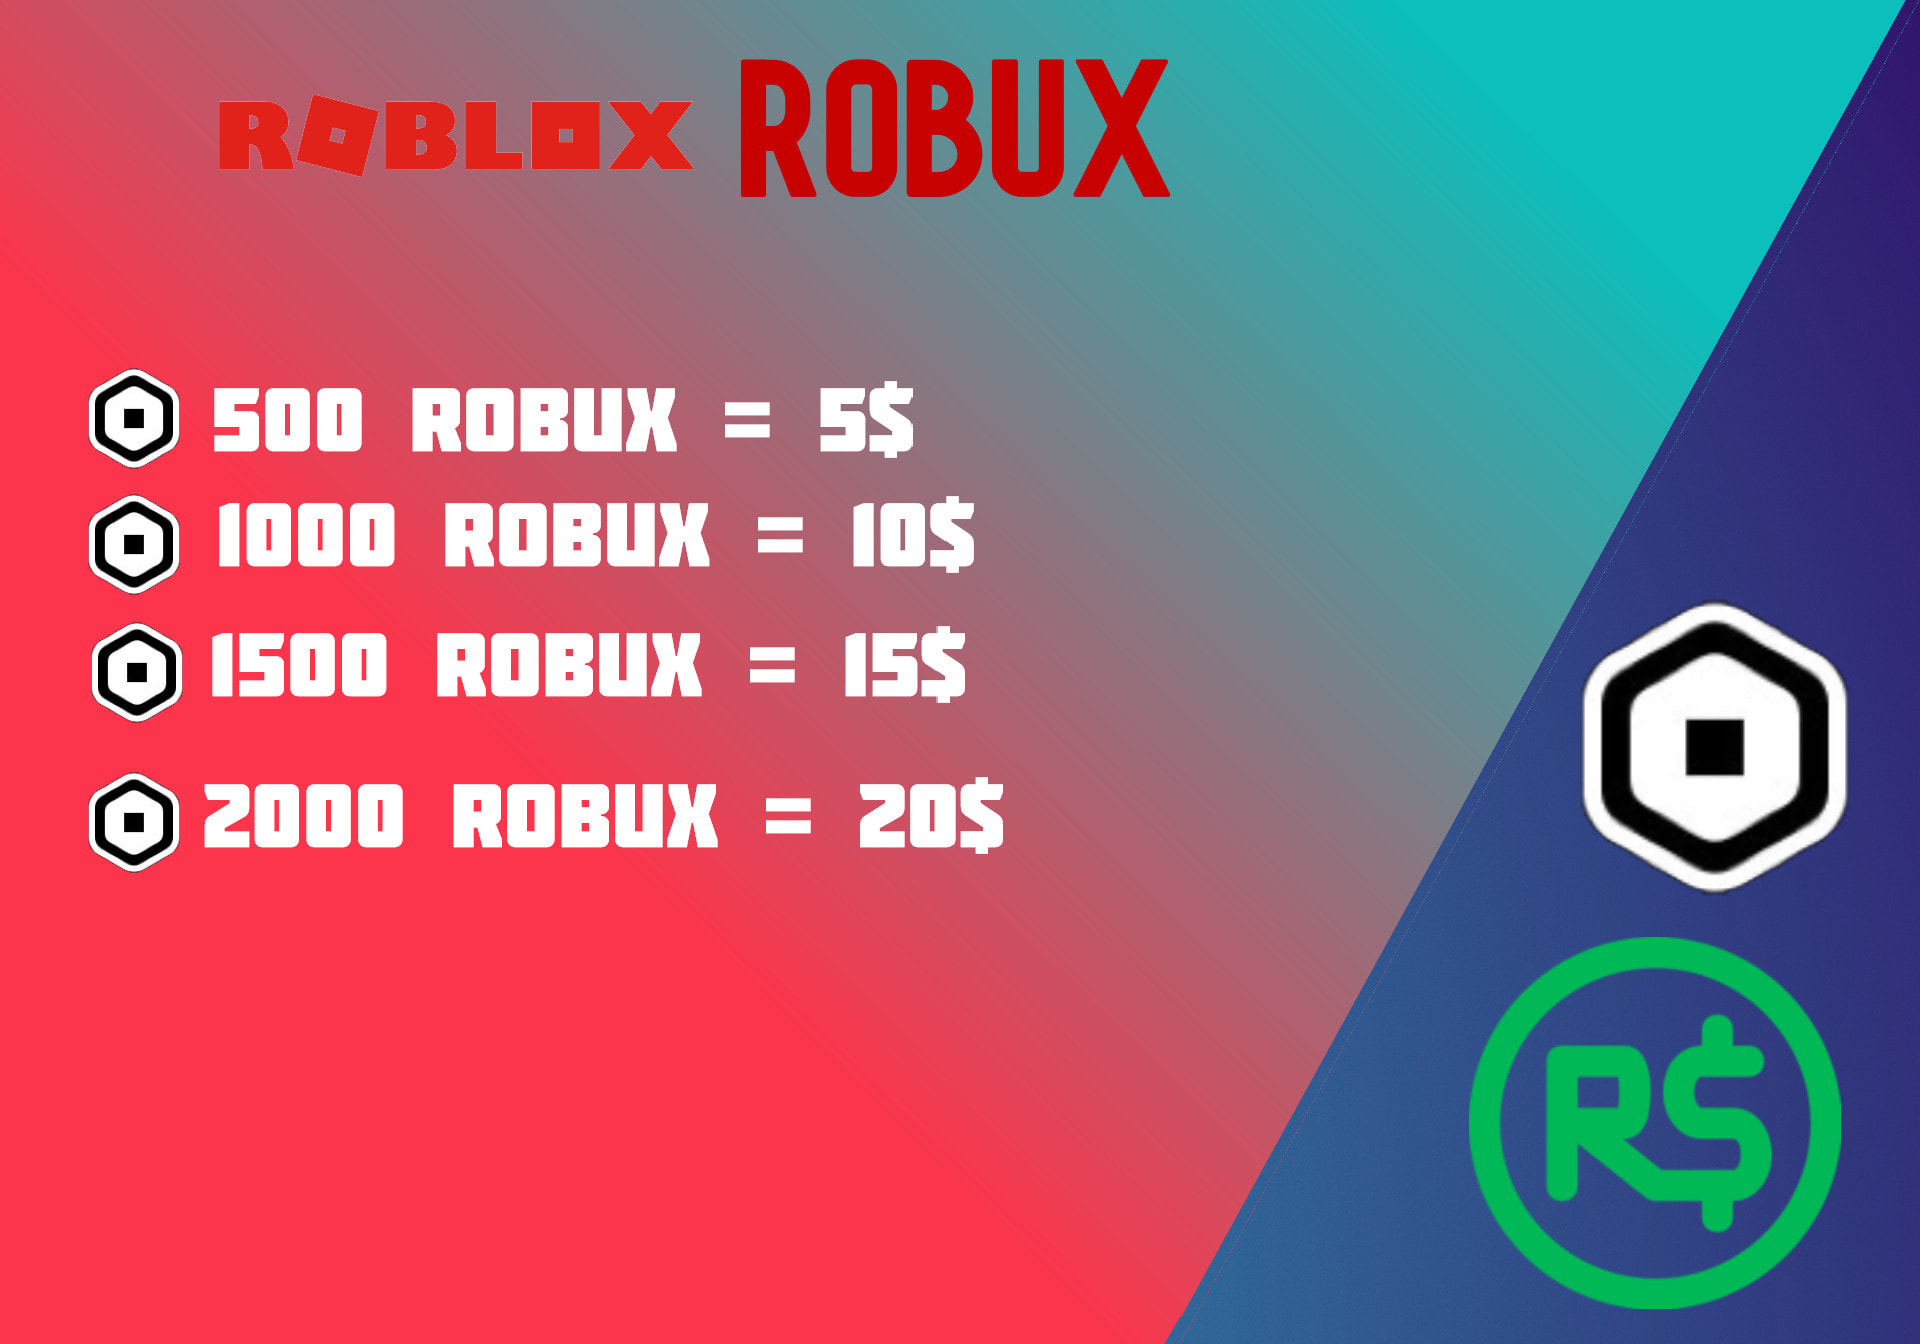 Robux price for 25 - wide 3